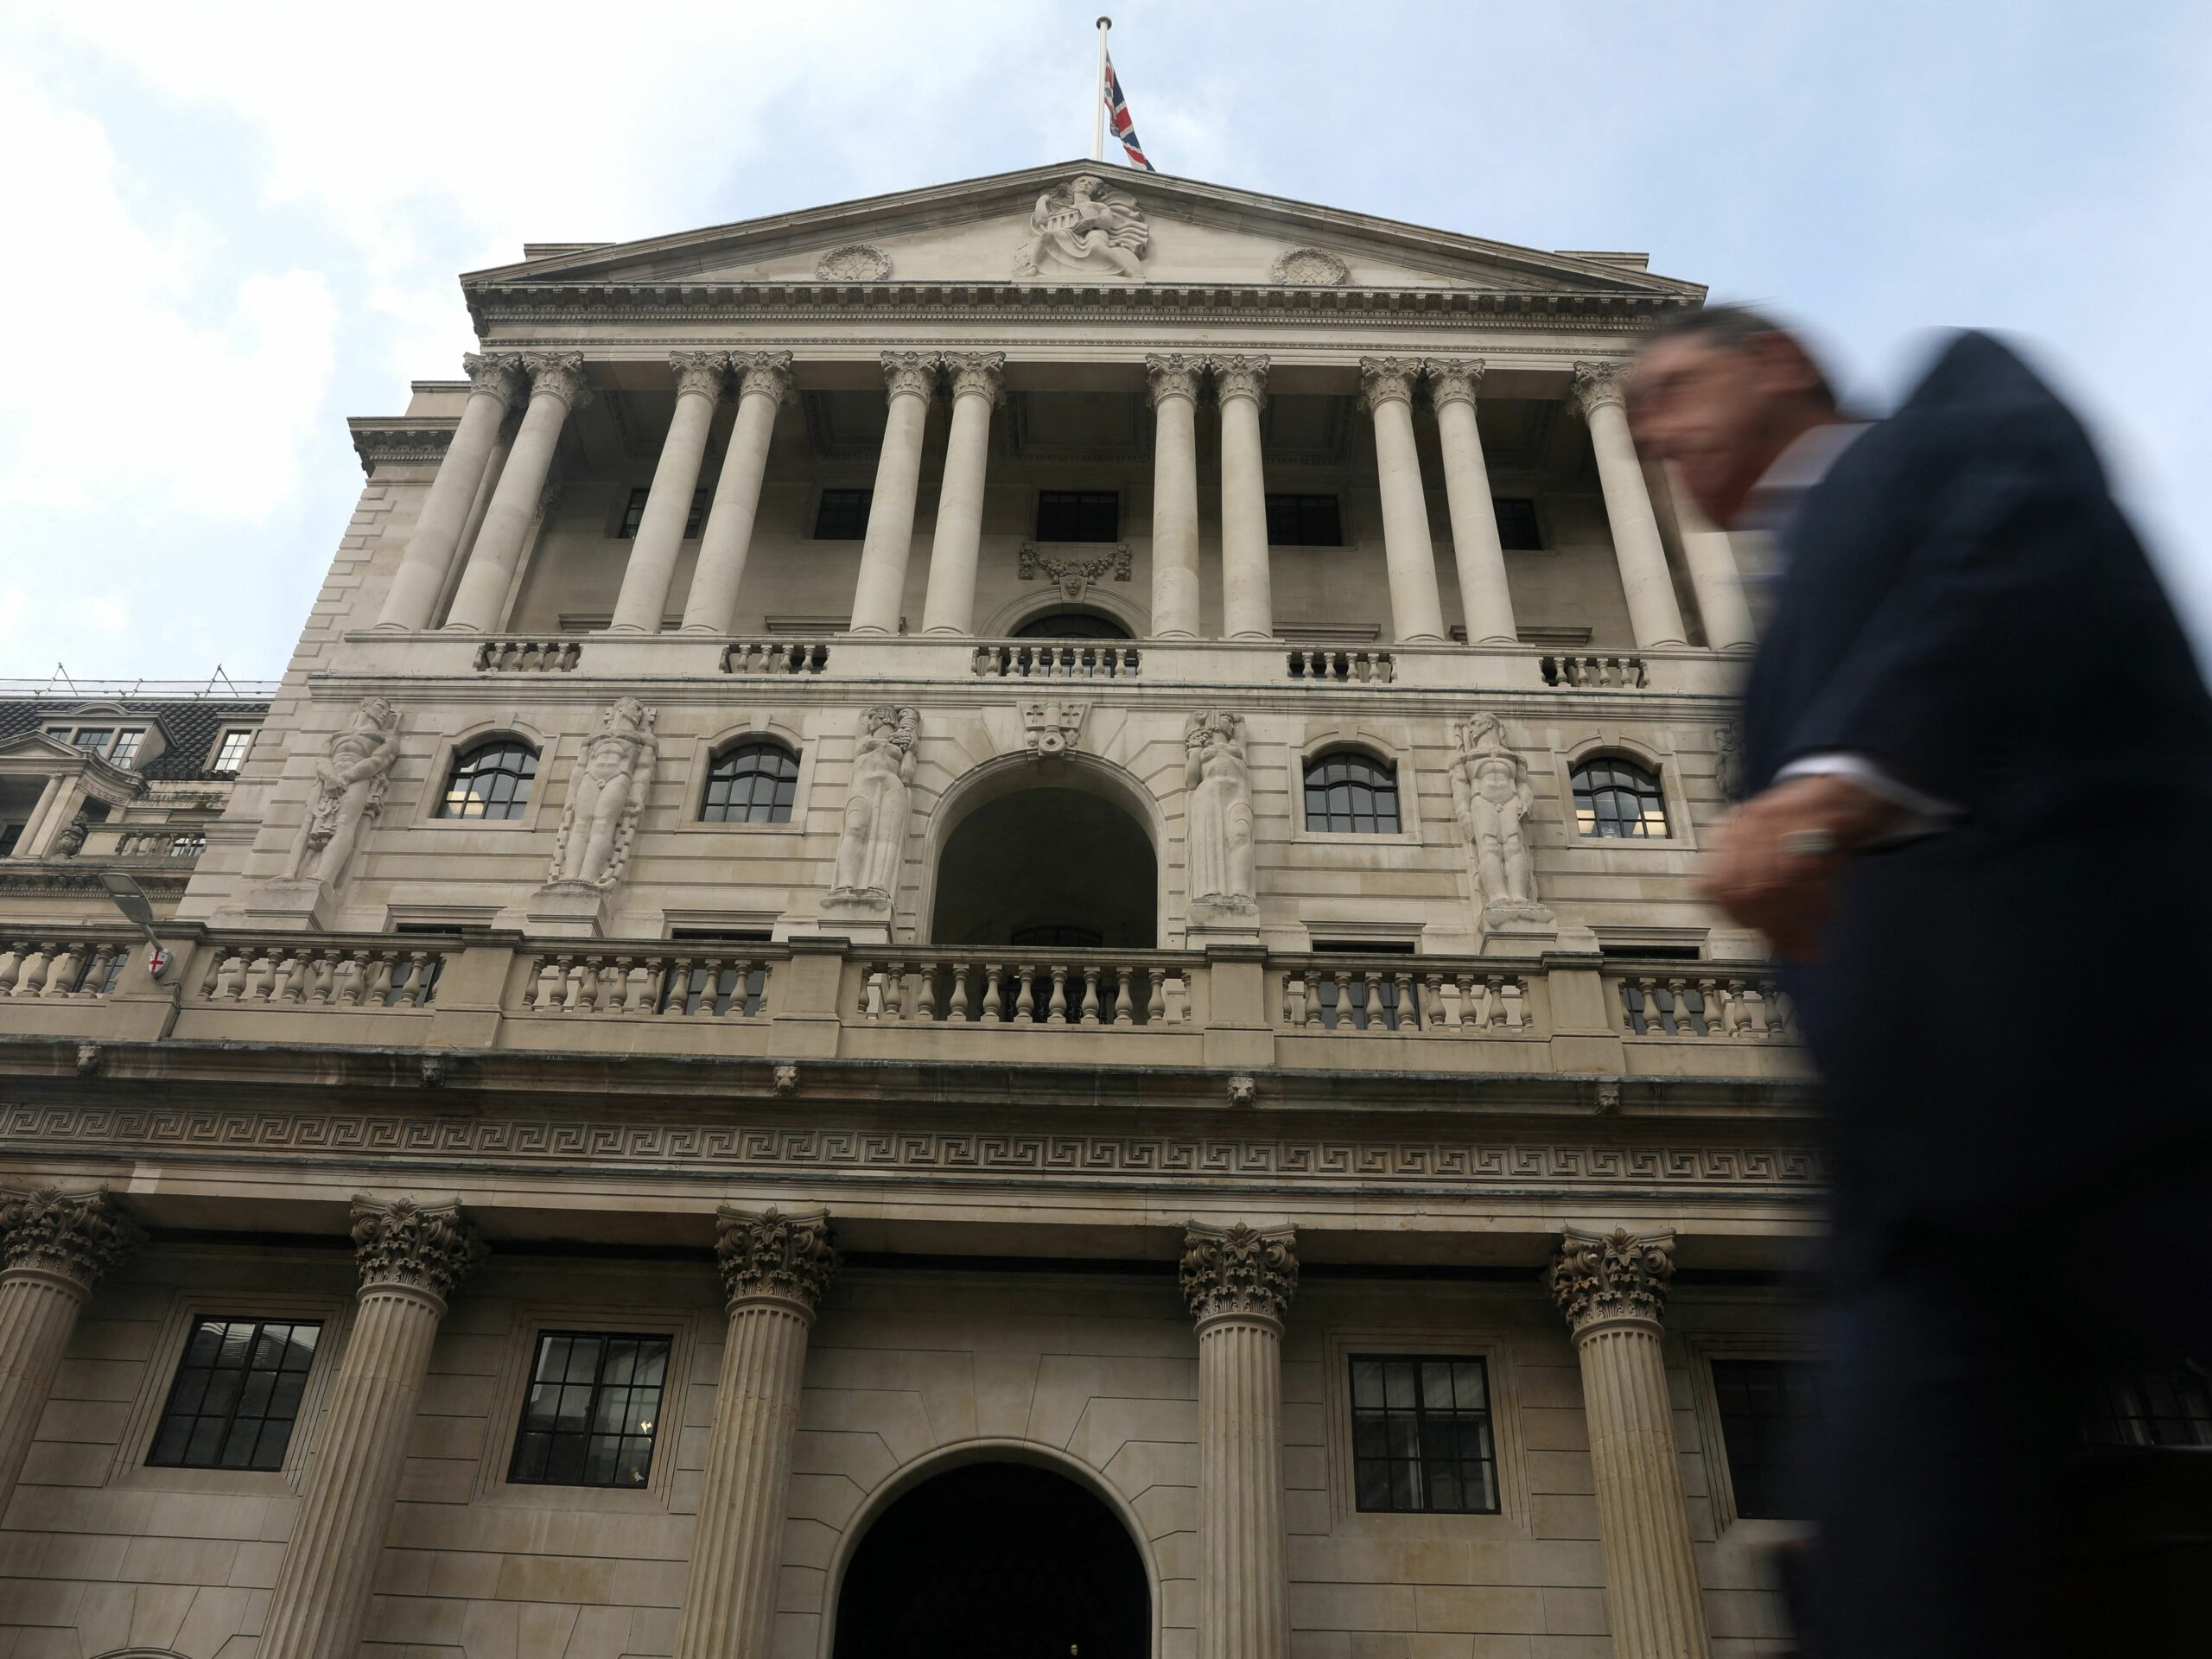 A pedestrian walks past Bank of England (BoE) in the City of London on September 22, 2022. - The Bank of England hiked its interest rate sharply again to combat decades-high inflation but warned the UK economy was slipping into recession. (Photo by Isabel INFANTES / AFP) (Photo by ISABEL INFANTES/AFP via Getty Images)